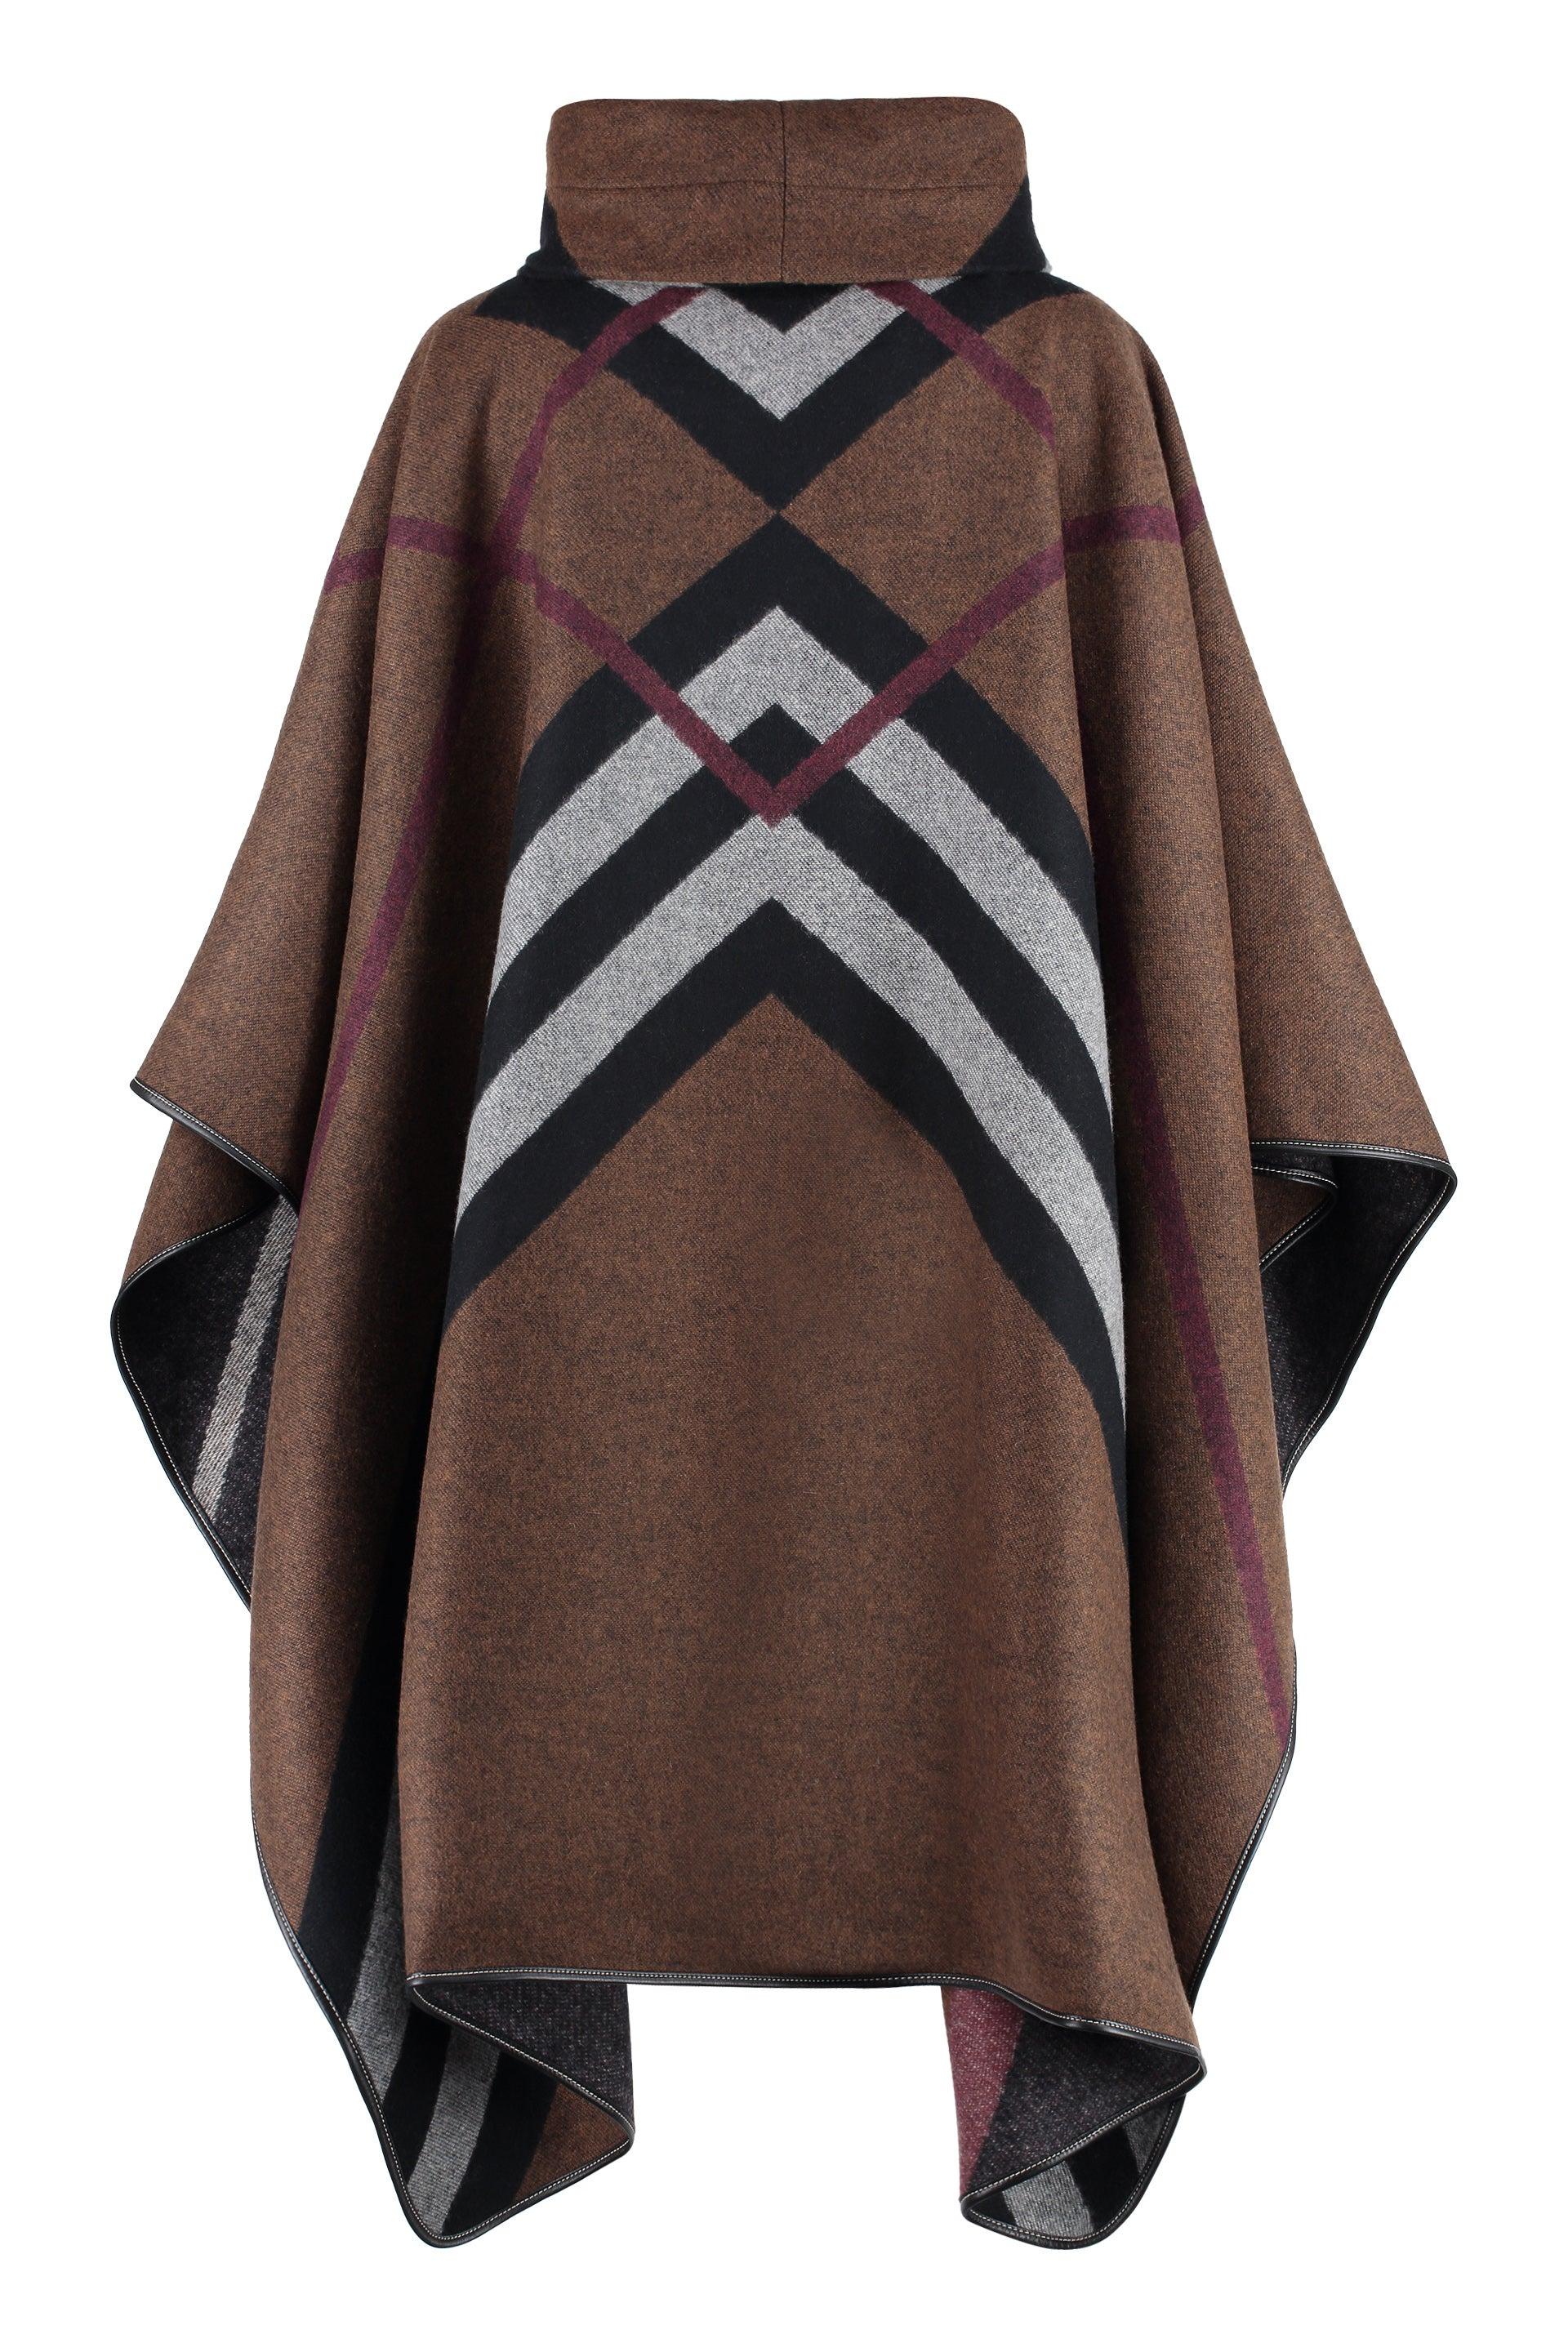 Burberry Cashmere Cape-coat in Brown | Lyst